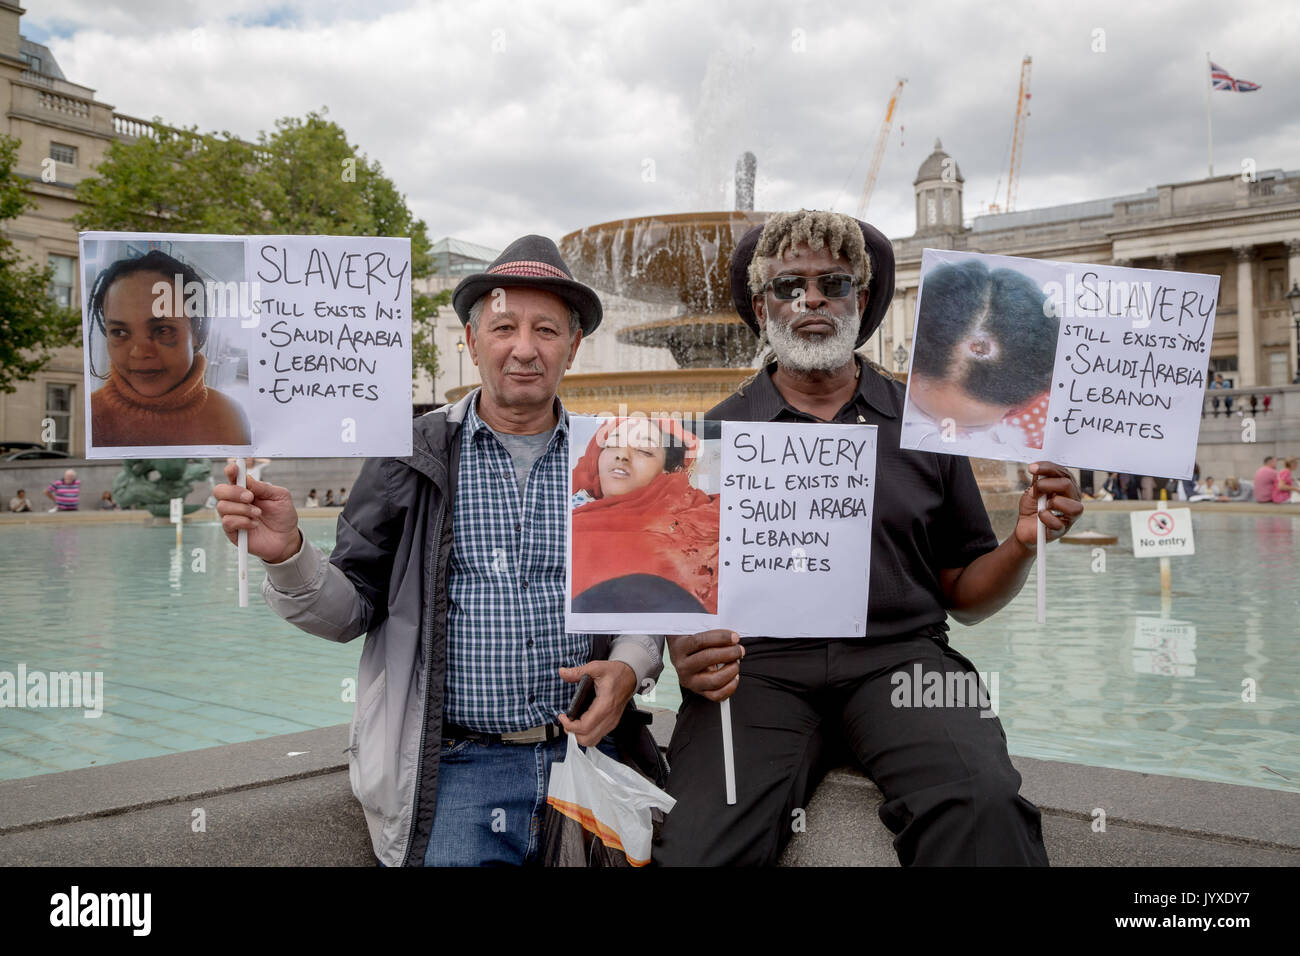 London, UK. 20th August, 2017. Anti-Slavery protesters in Trafalgar Square bring awareness to on-going human rights issues and abuses in Saudi Arabia, Lebanon and UAE. Credit: Guy Corbishley/Alamy Live News Stock Photo